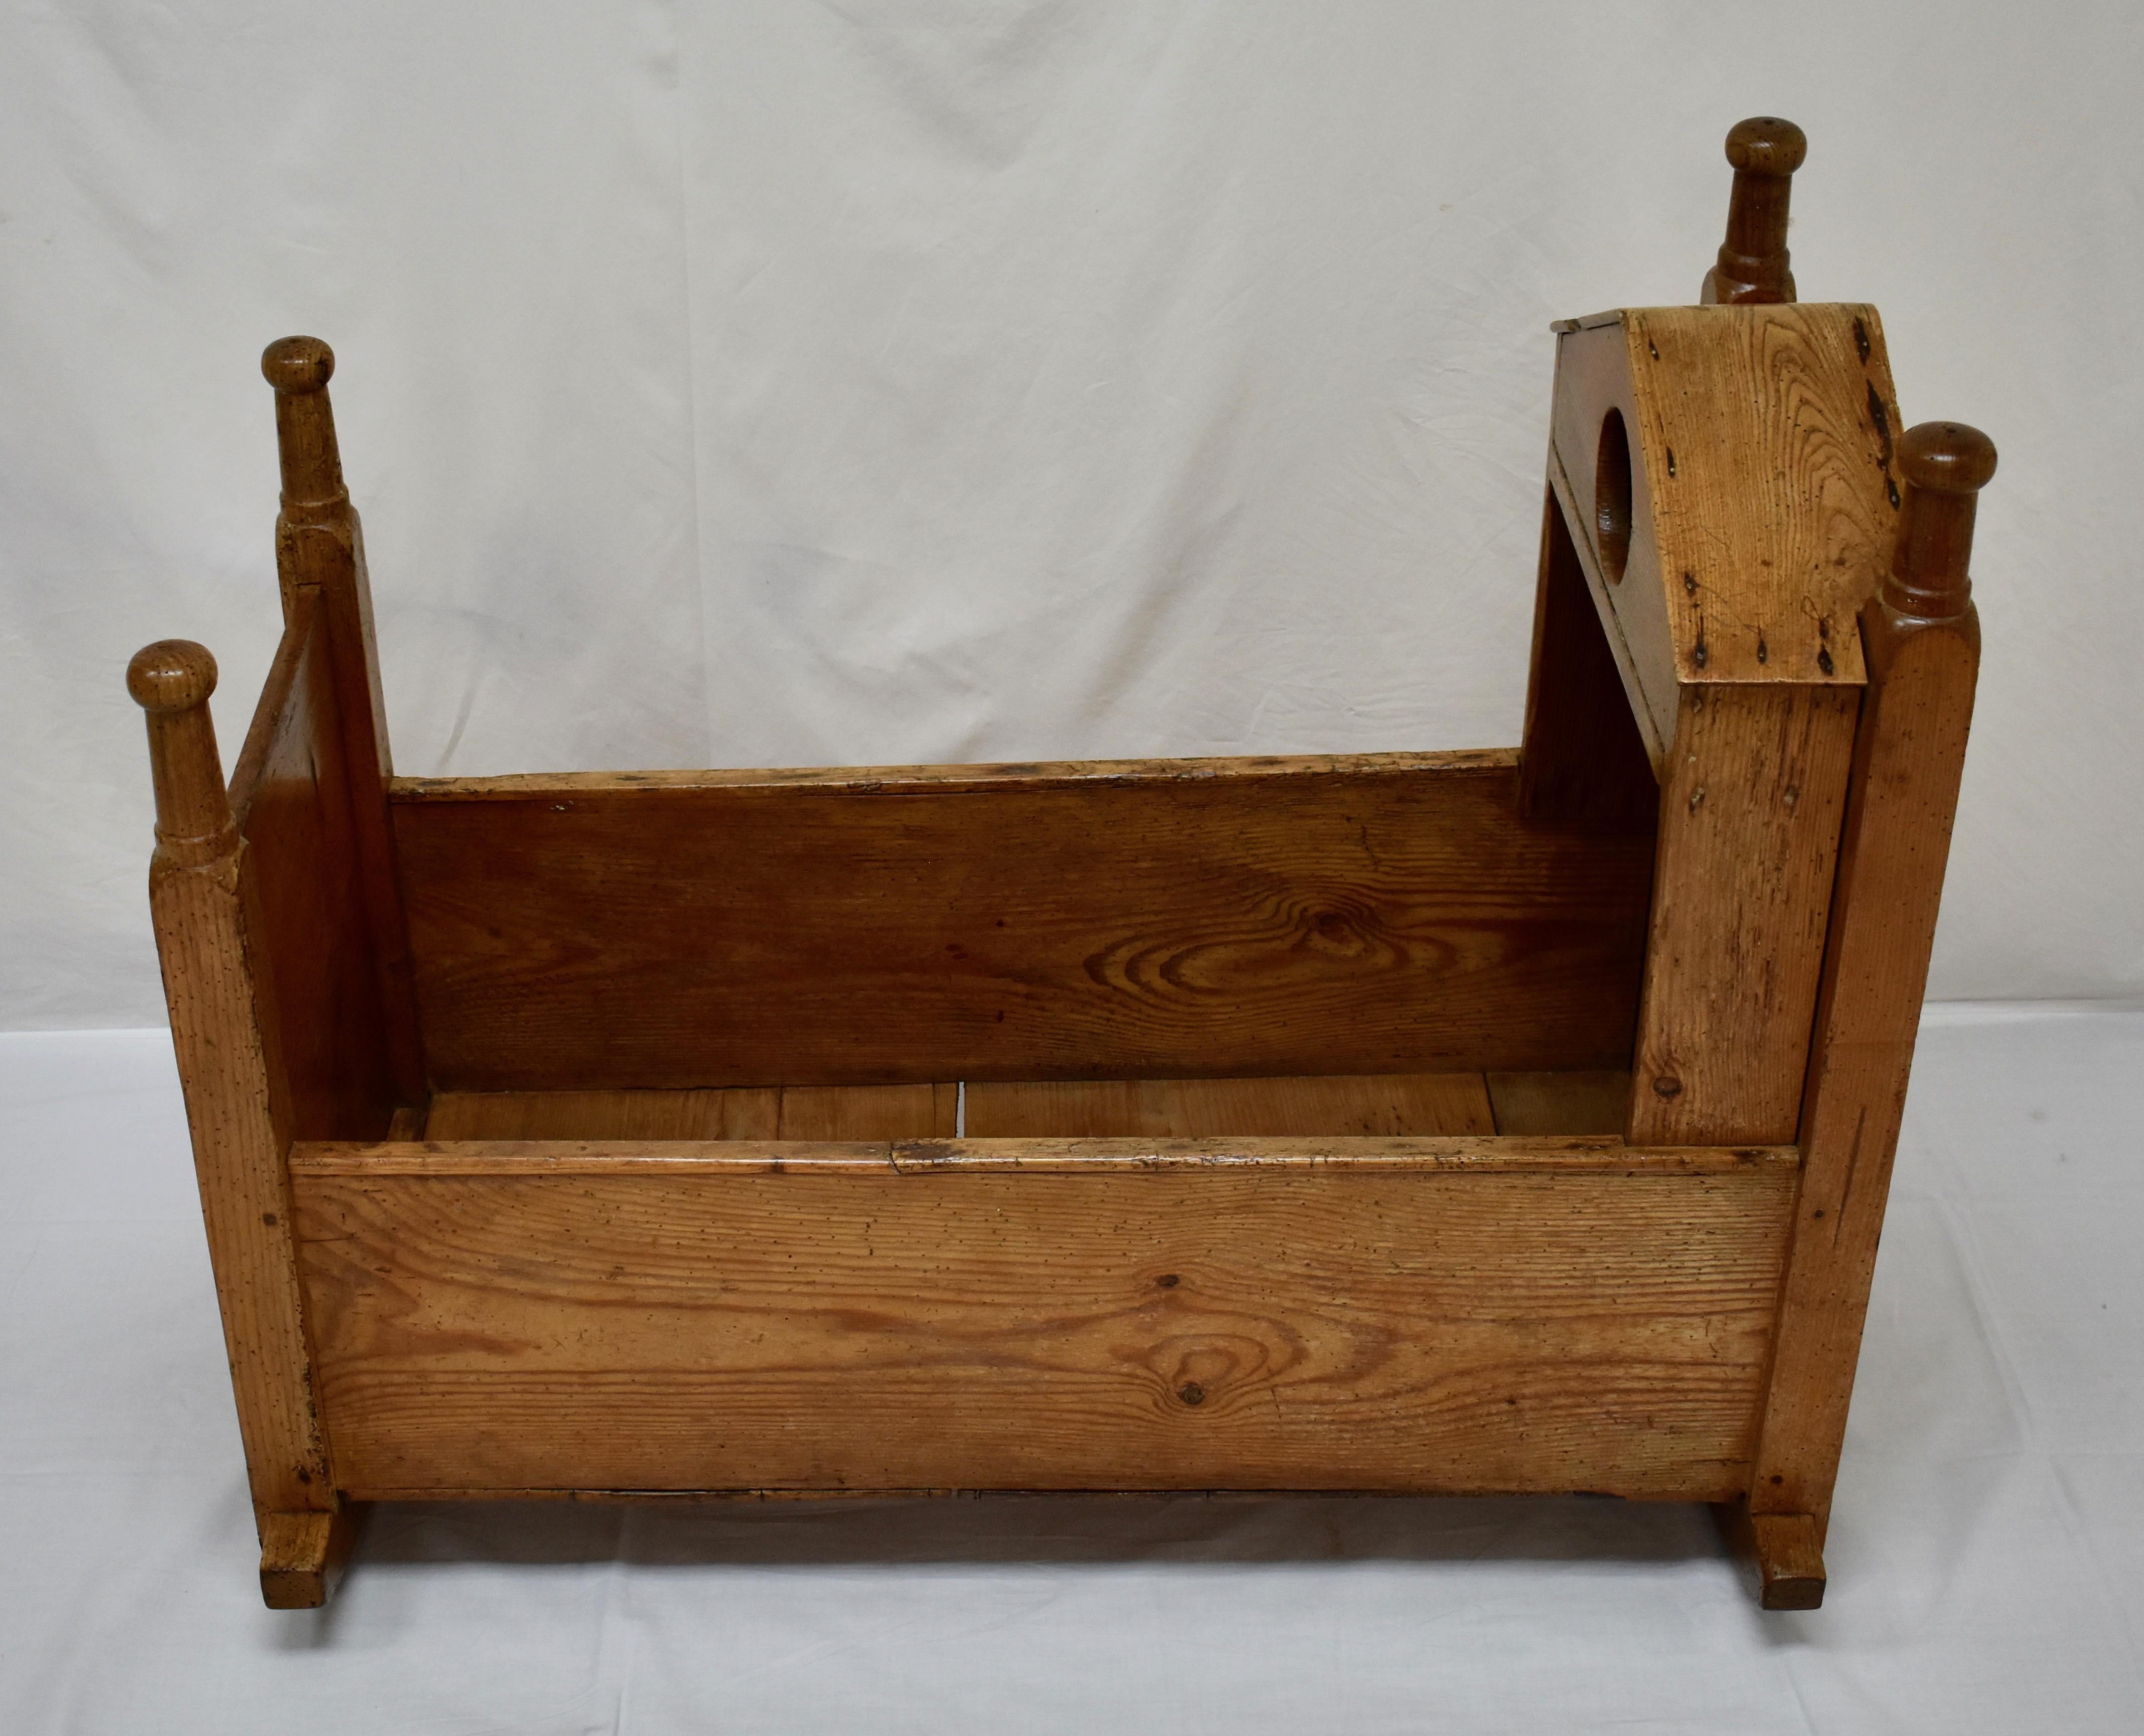 This is a charming, very rustic hooded rocking cradle with an interesting and unusual “bird house” with a circular opening, built into the shallow hood, presumably to store small items; perhaps toys or other distractions. The sides and bottom are